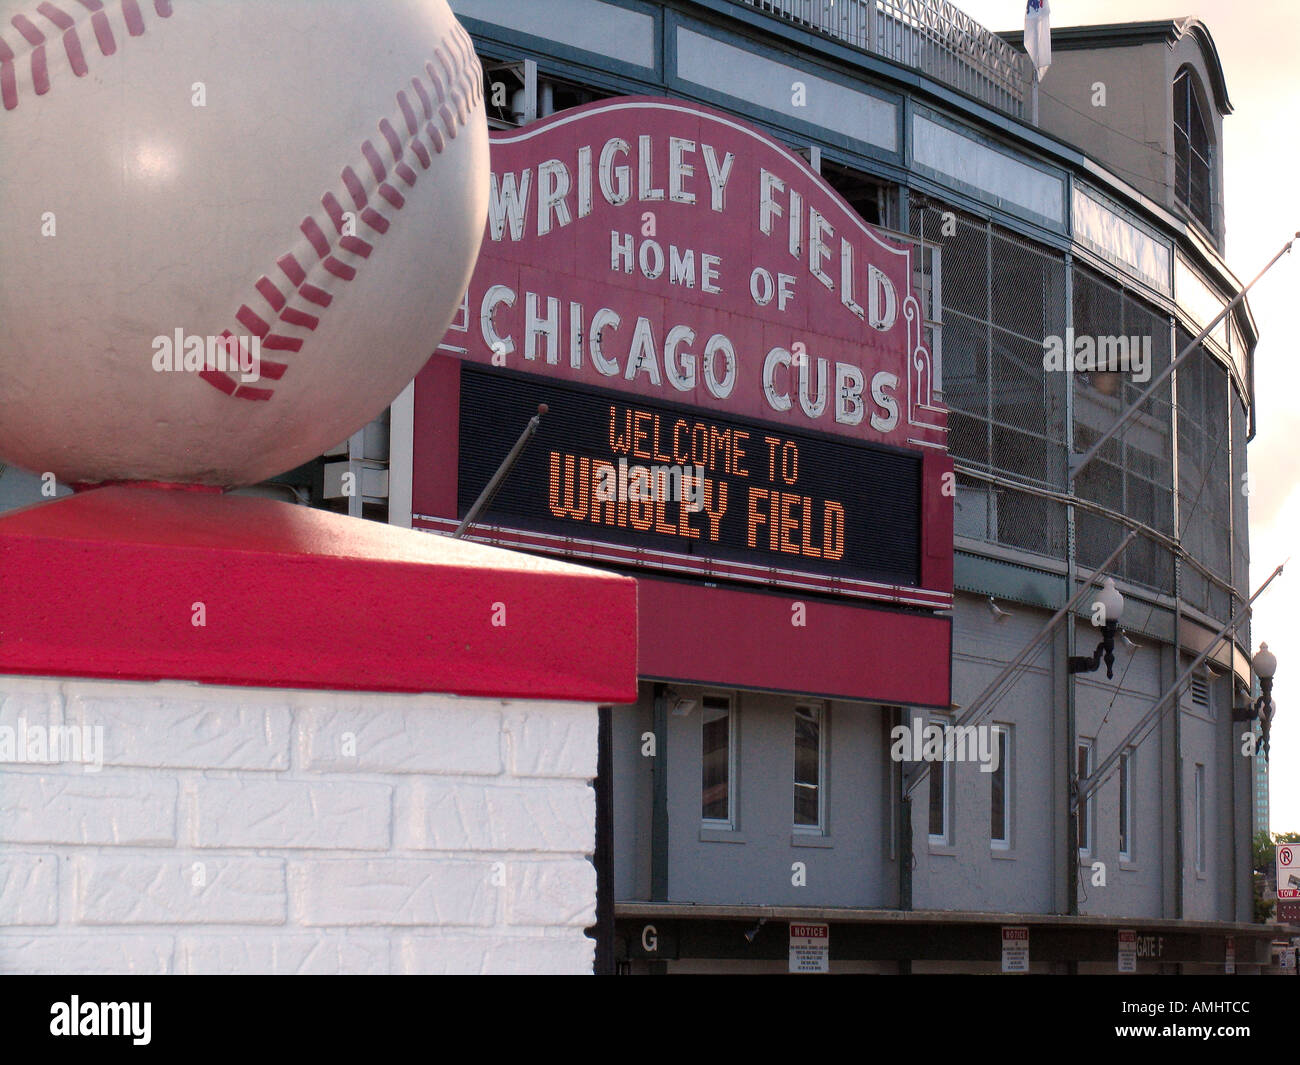 Wrigley Field home of Chicago Cubs Illinois USA Stock Photo